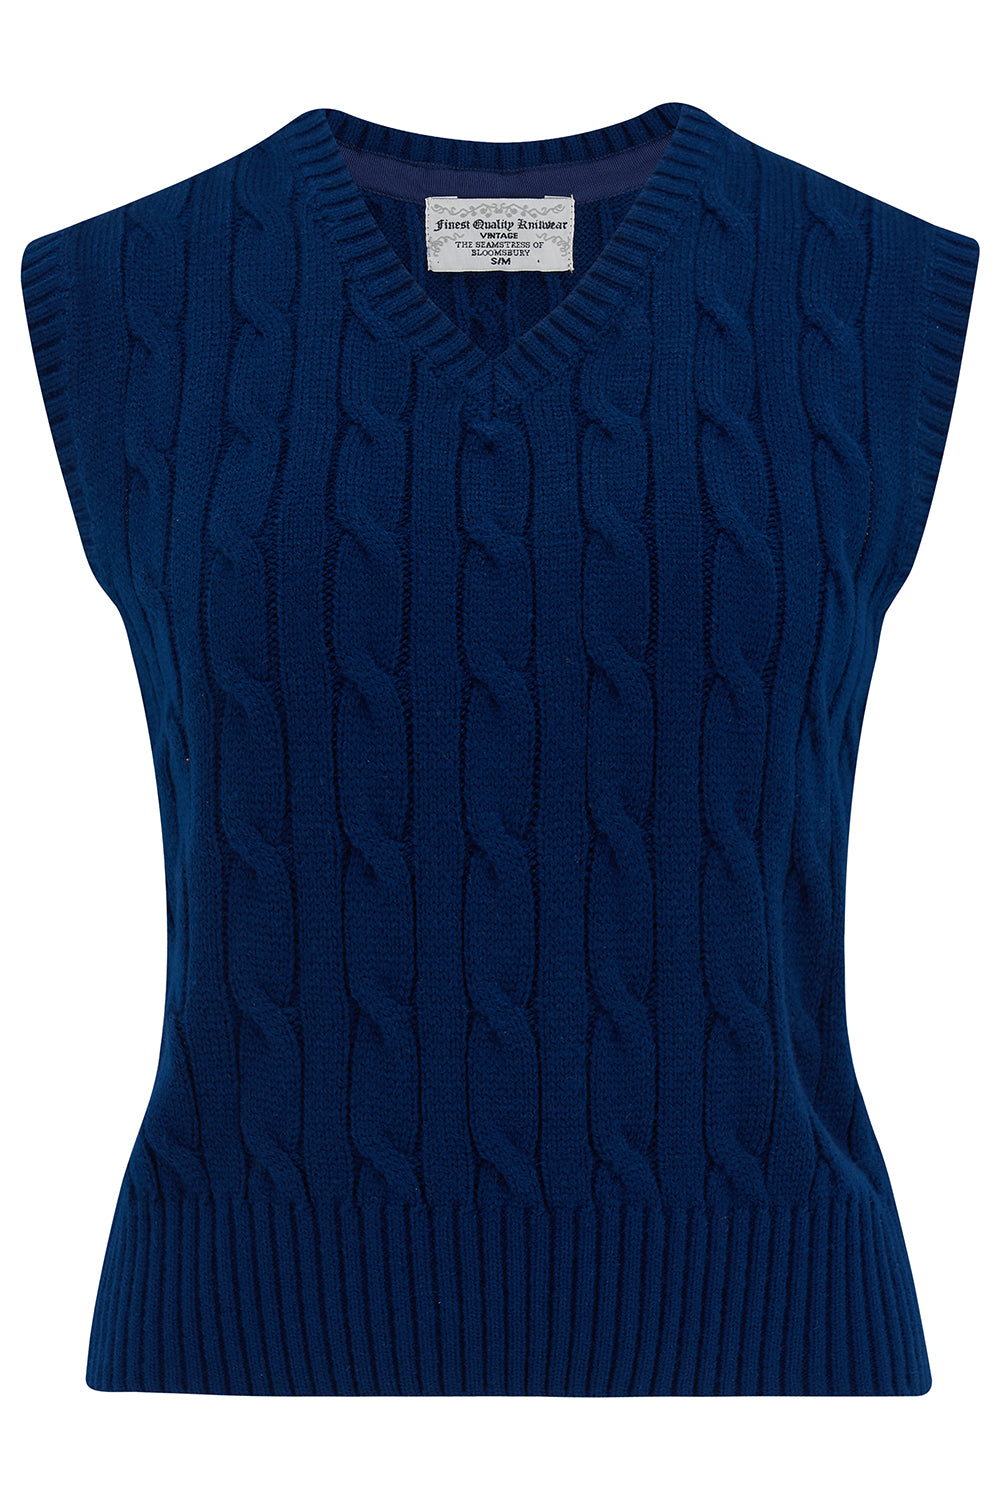 Cable Knit Slipover in French Navy, Stunning 1940s True Vintage Style - True and authentic vintage style clothing, inspired by the Classic styles of CC41 , WW2 and the fun 1950s RocknRoll era, for everyday wear plus events like Goodwood Revival, Twinwood Festival and Viva Las Vegas Rockabilly Weekend Rock n Romance The Seamstress Of Bloomsbury